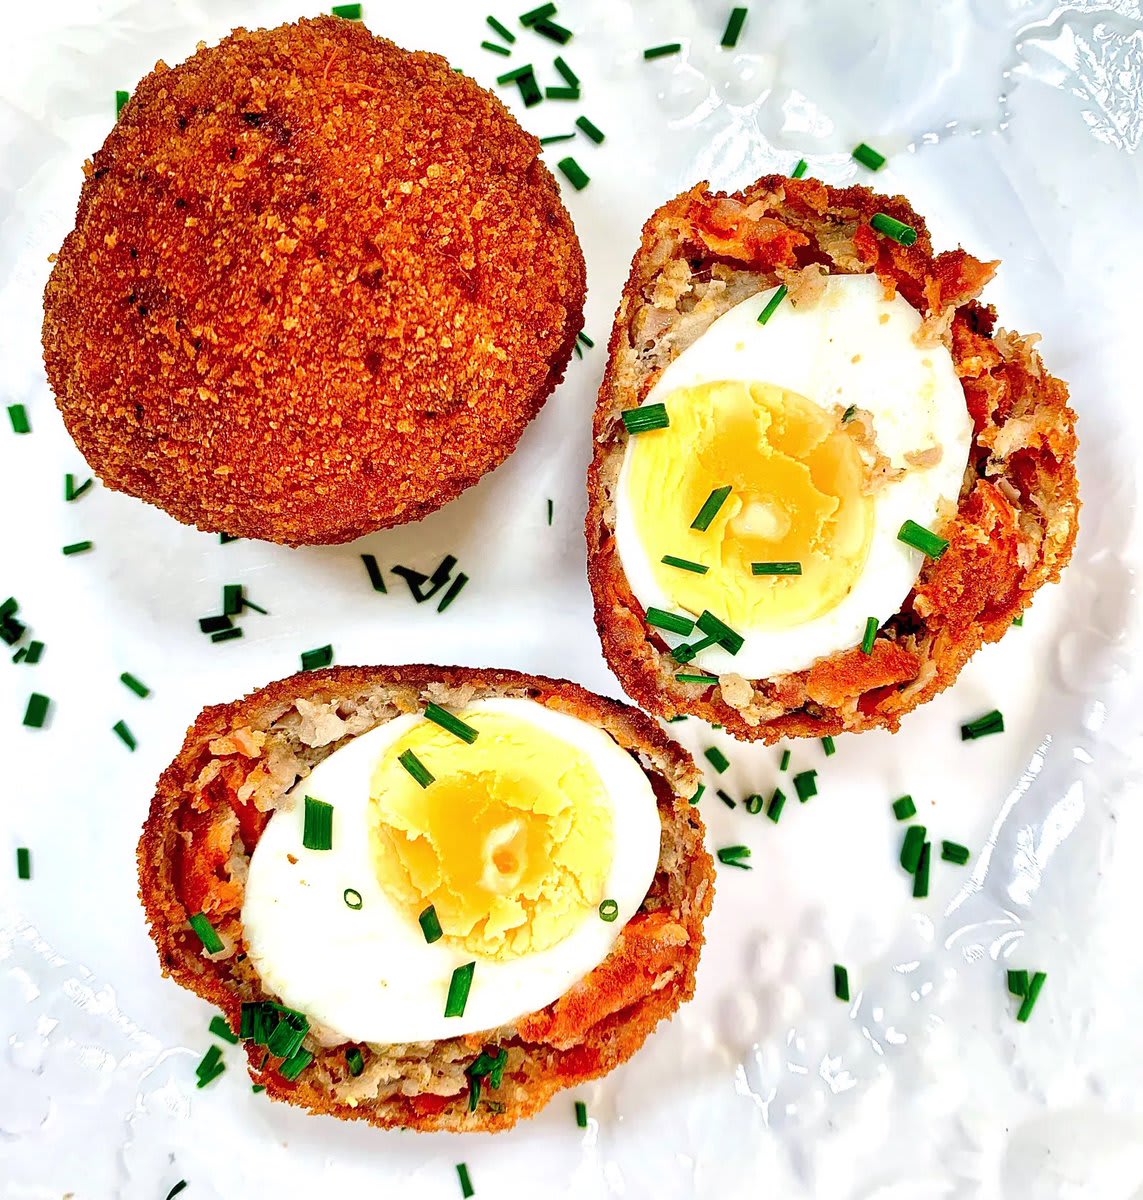 RecipeOfTheDay Chorizo Scotch Eggs These scotch eggs have been taken to the next level with a layer of fiery chorizo mixed in with the sausage meat. Delicious! Check out the recipe